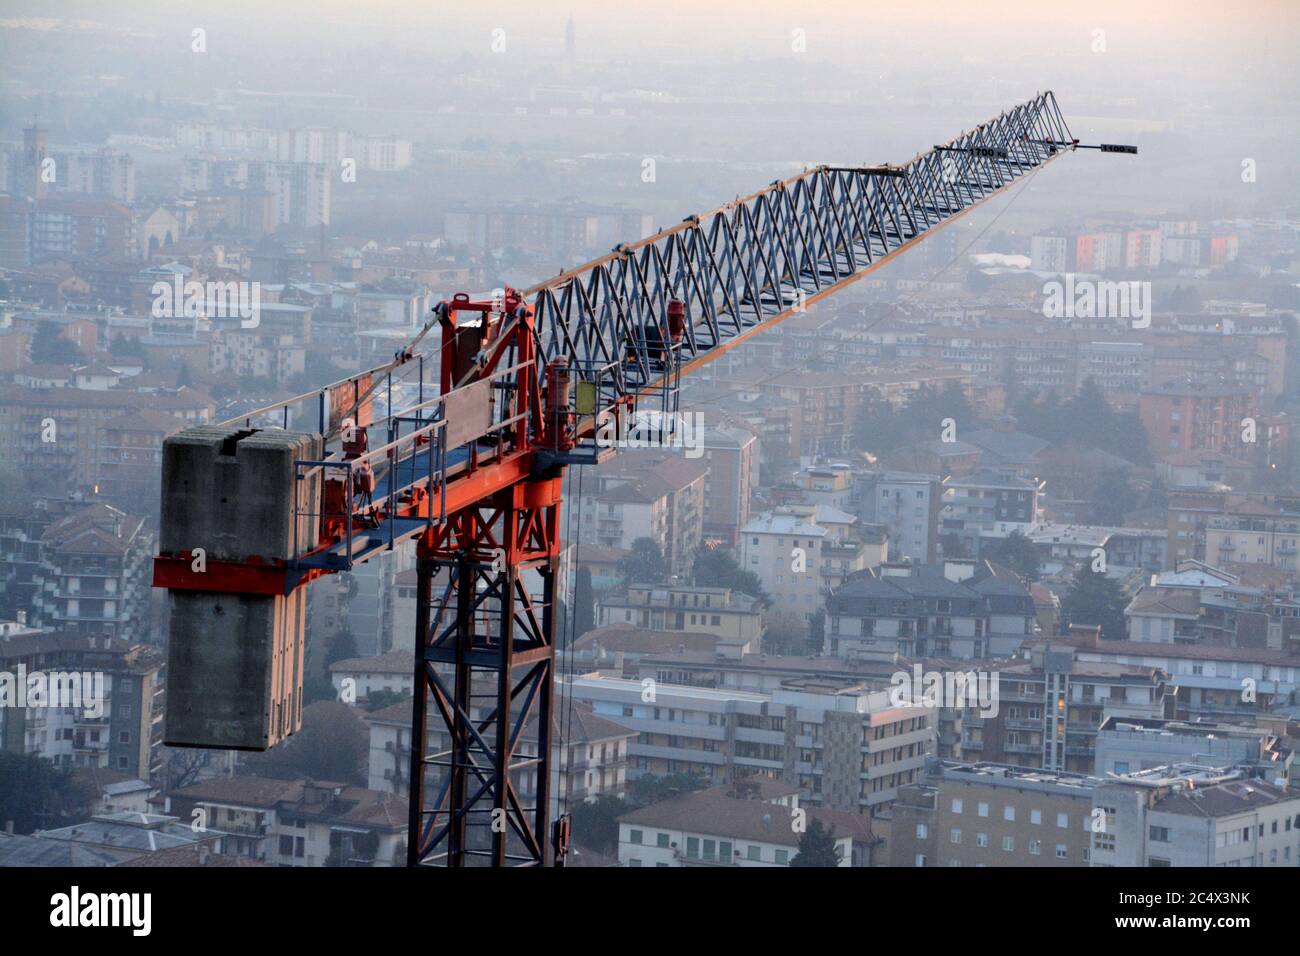 Large and tall construction crane overlooking a city Stock Photo